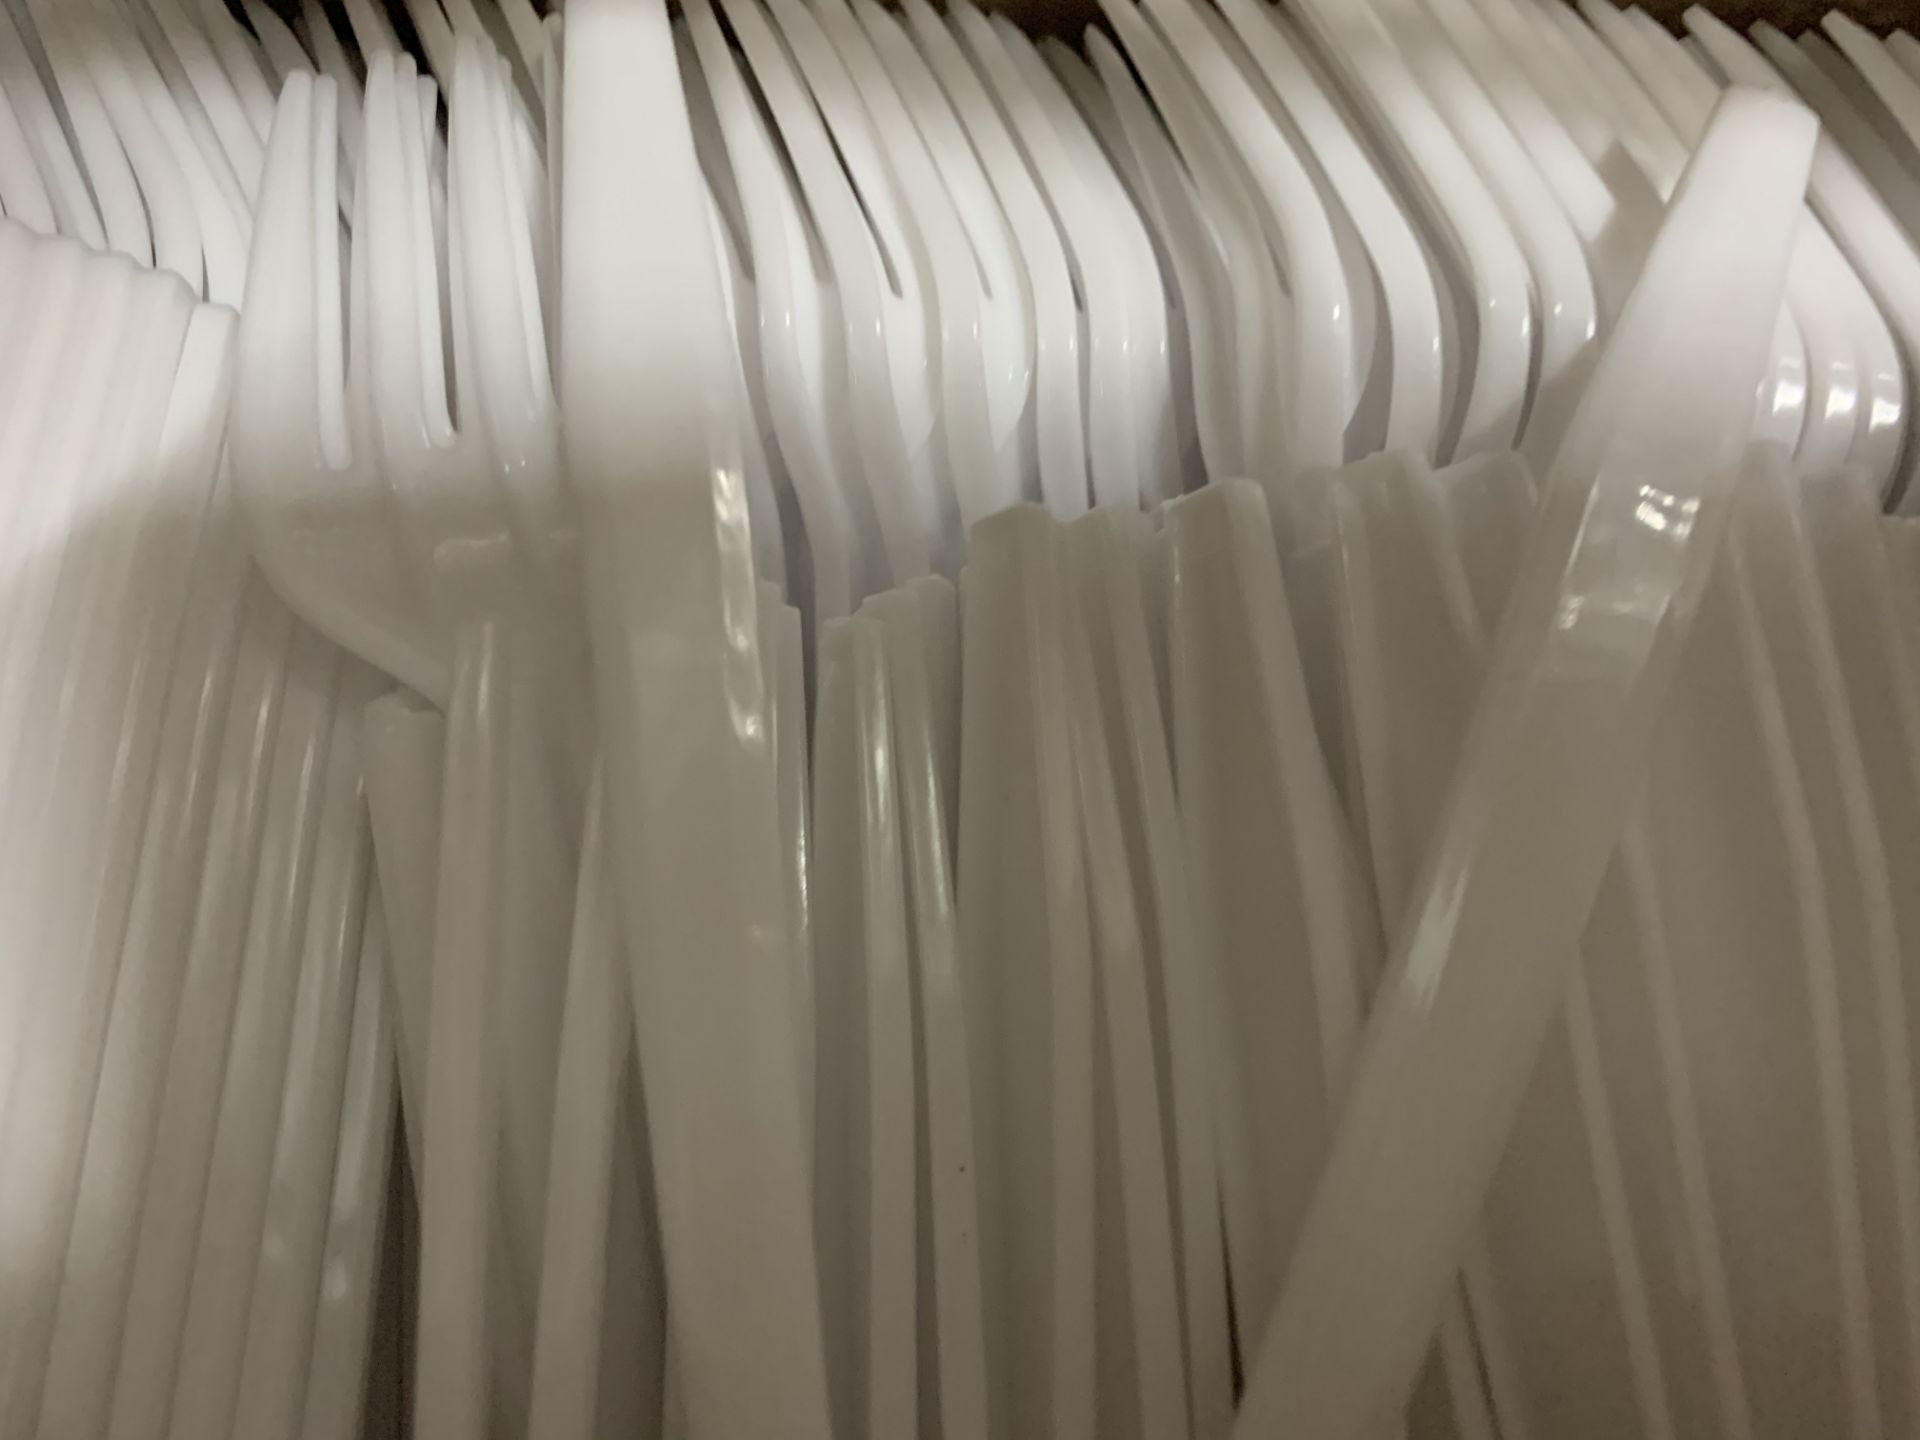 5 x Boxes of 1000 Mini Forks by 888 Gastro Disposables - Image 4 of 5